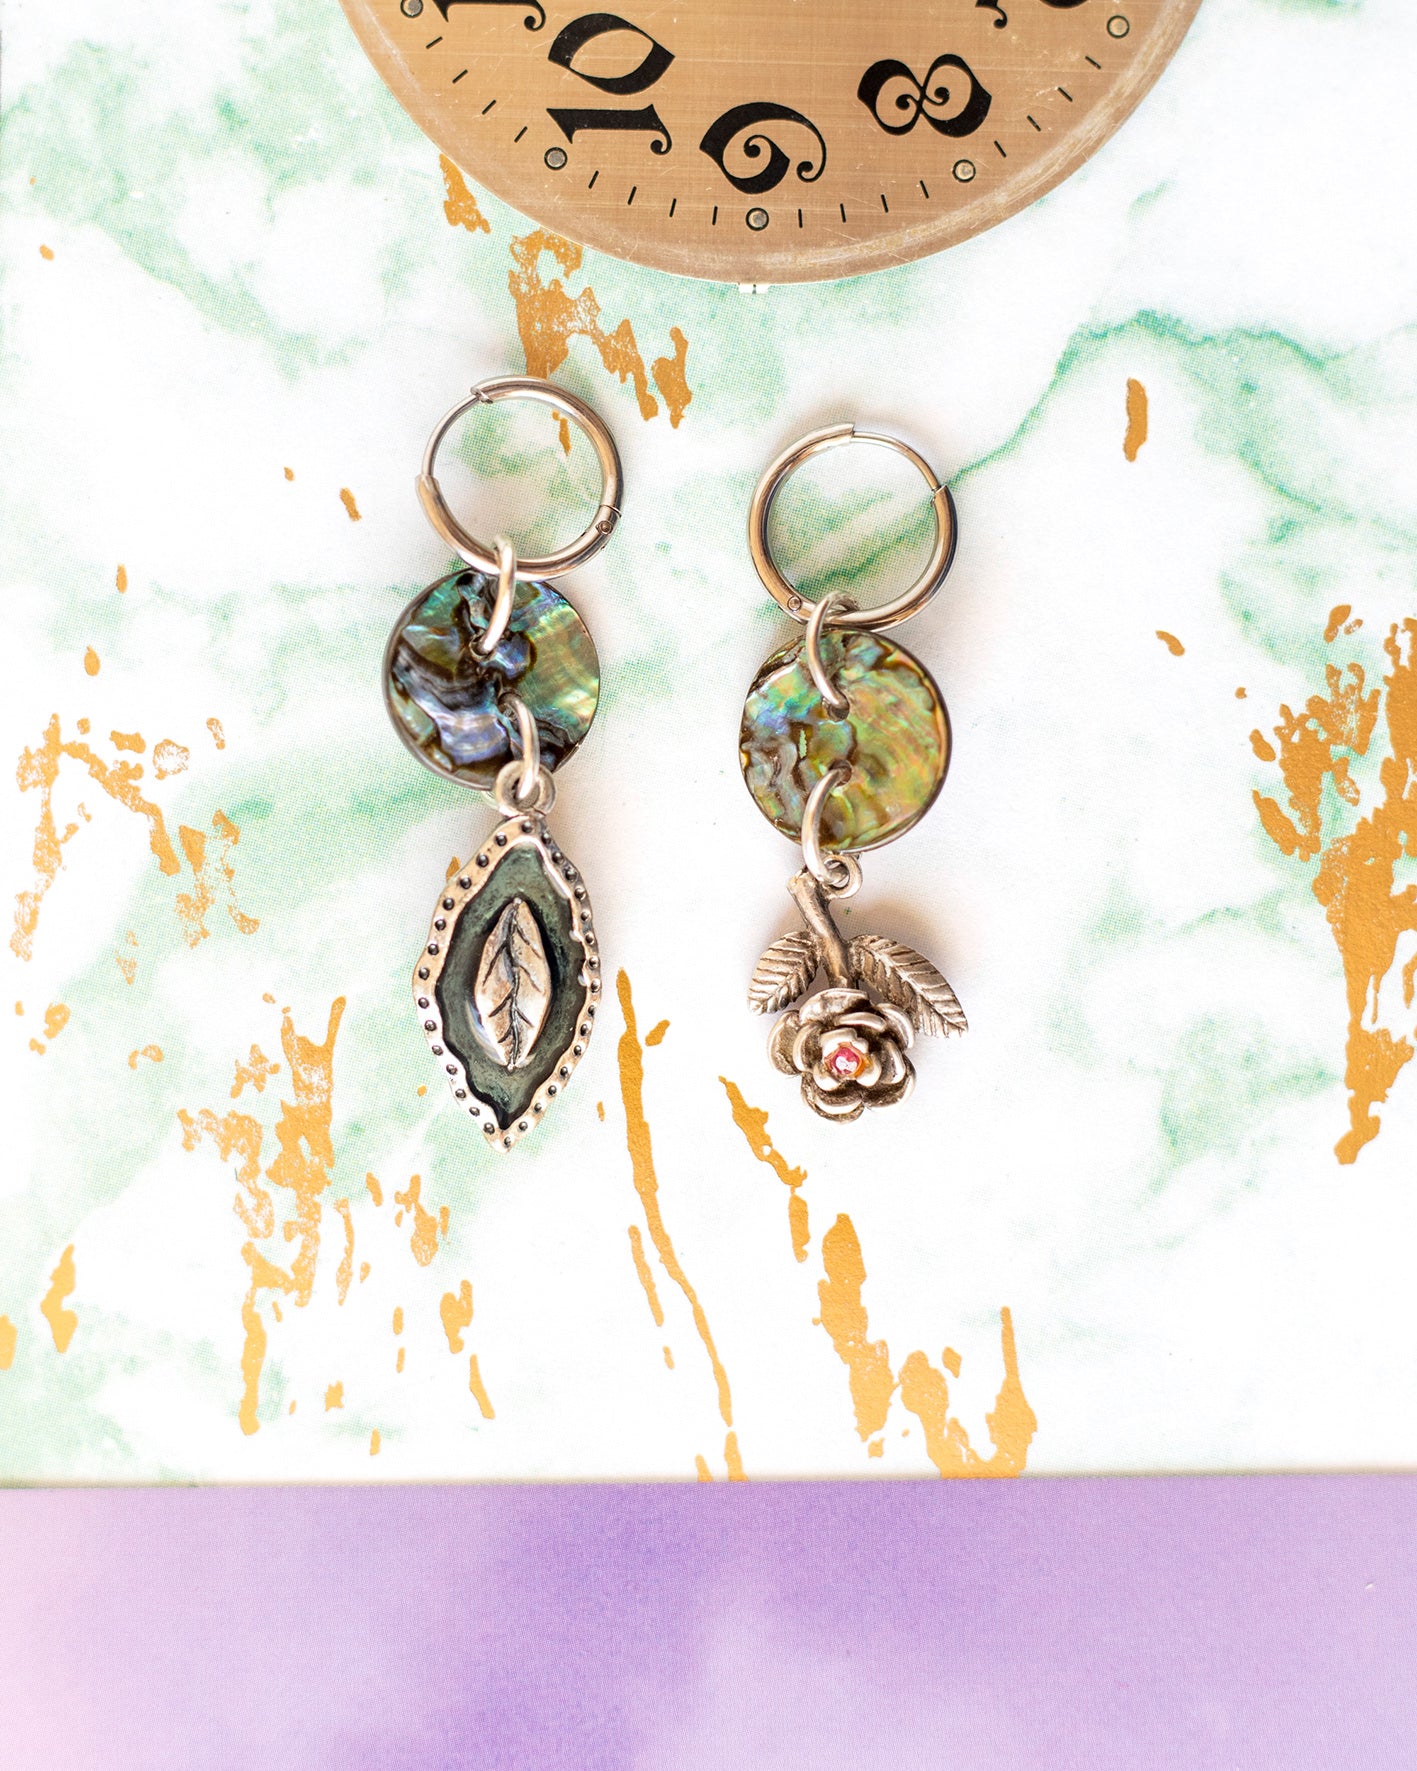 Steel hoop earrings and abalone mother-of-pearl buttons